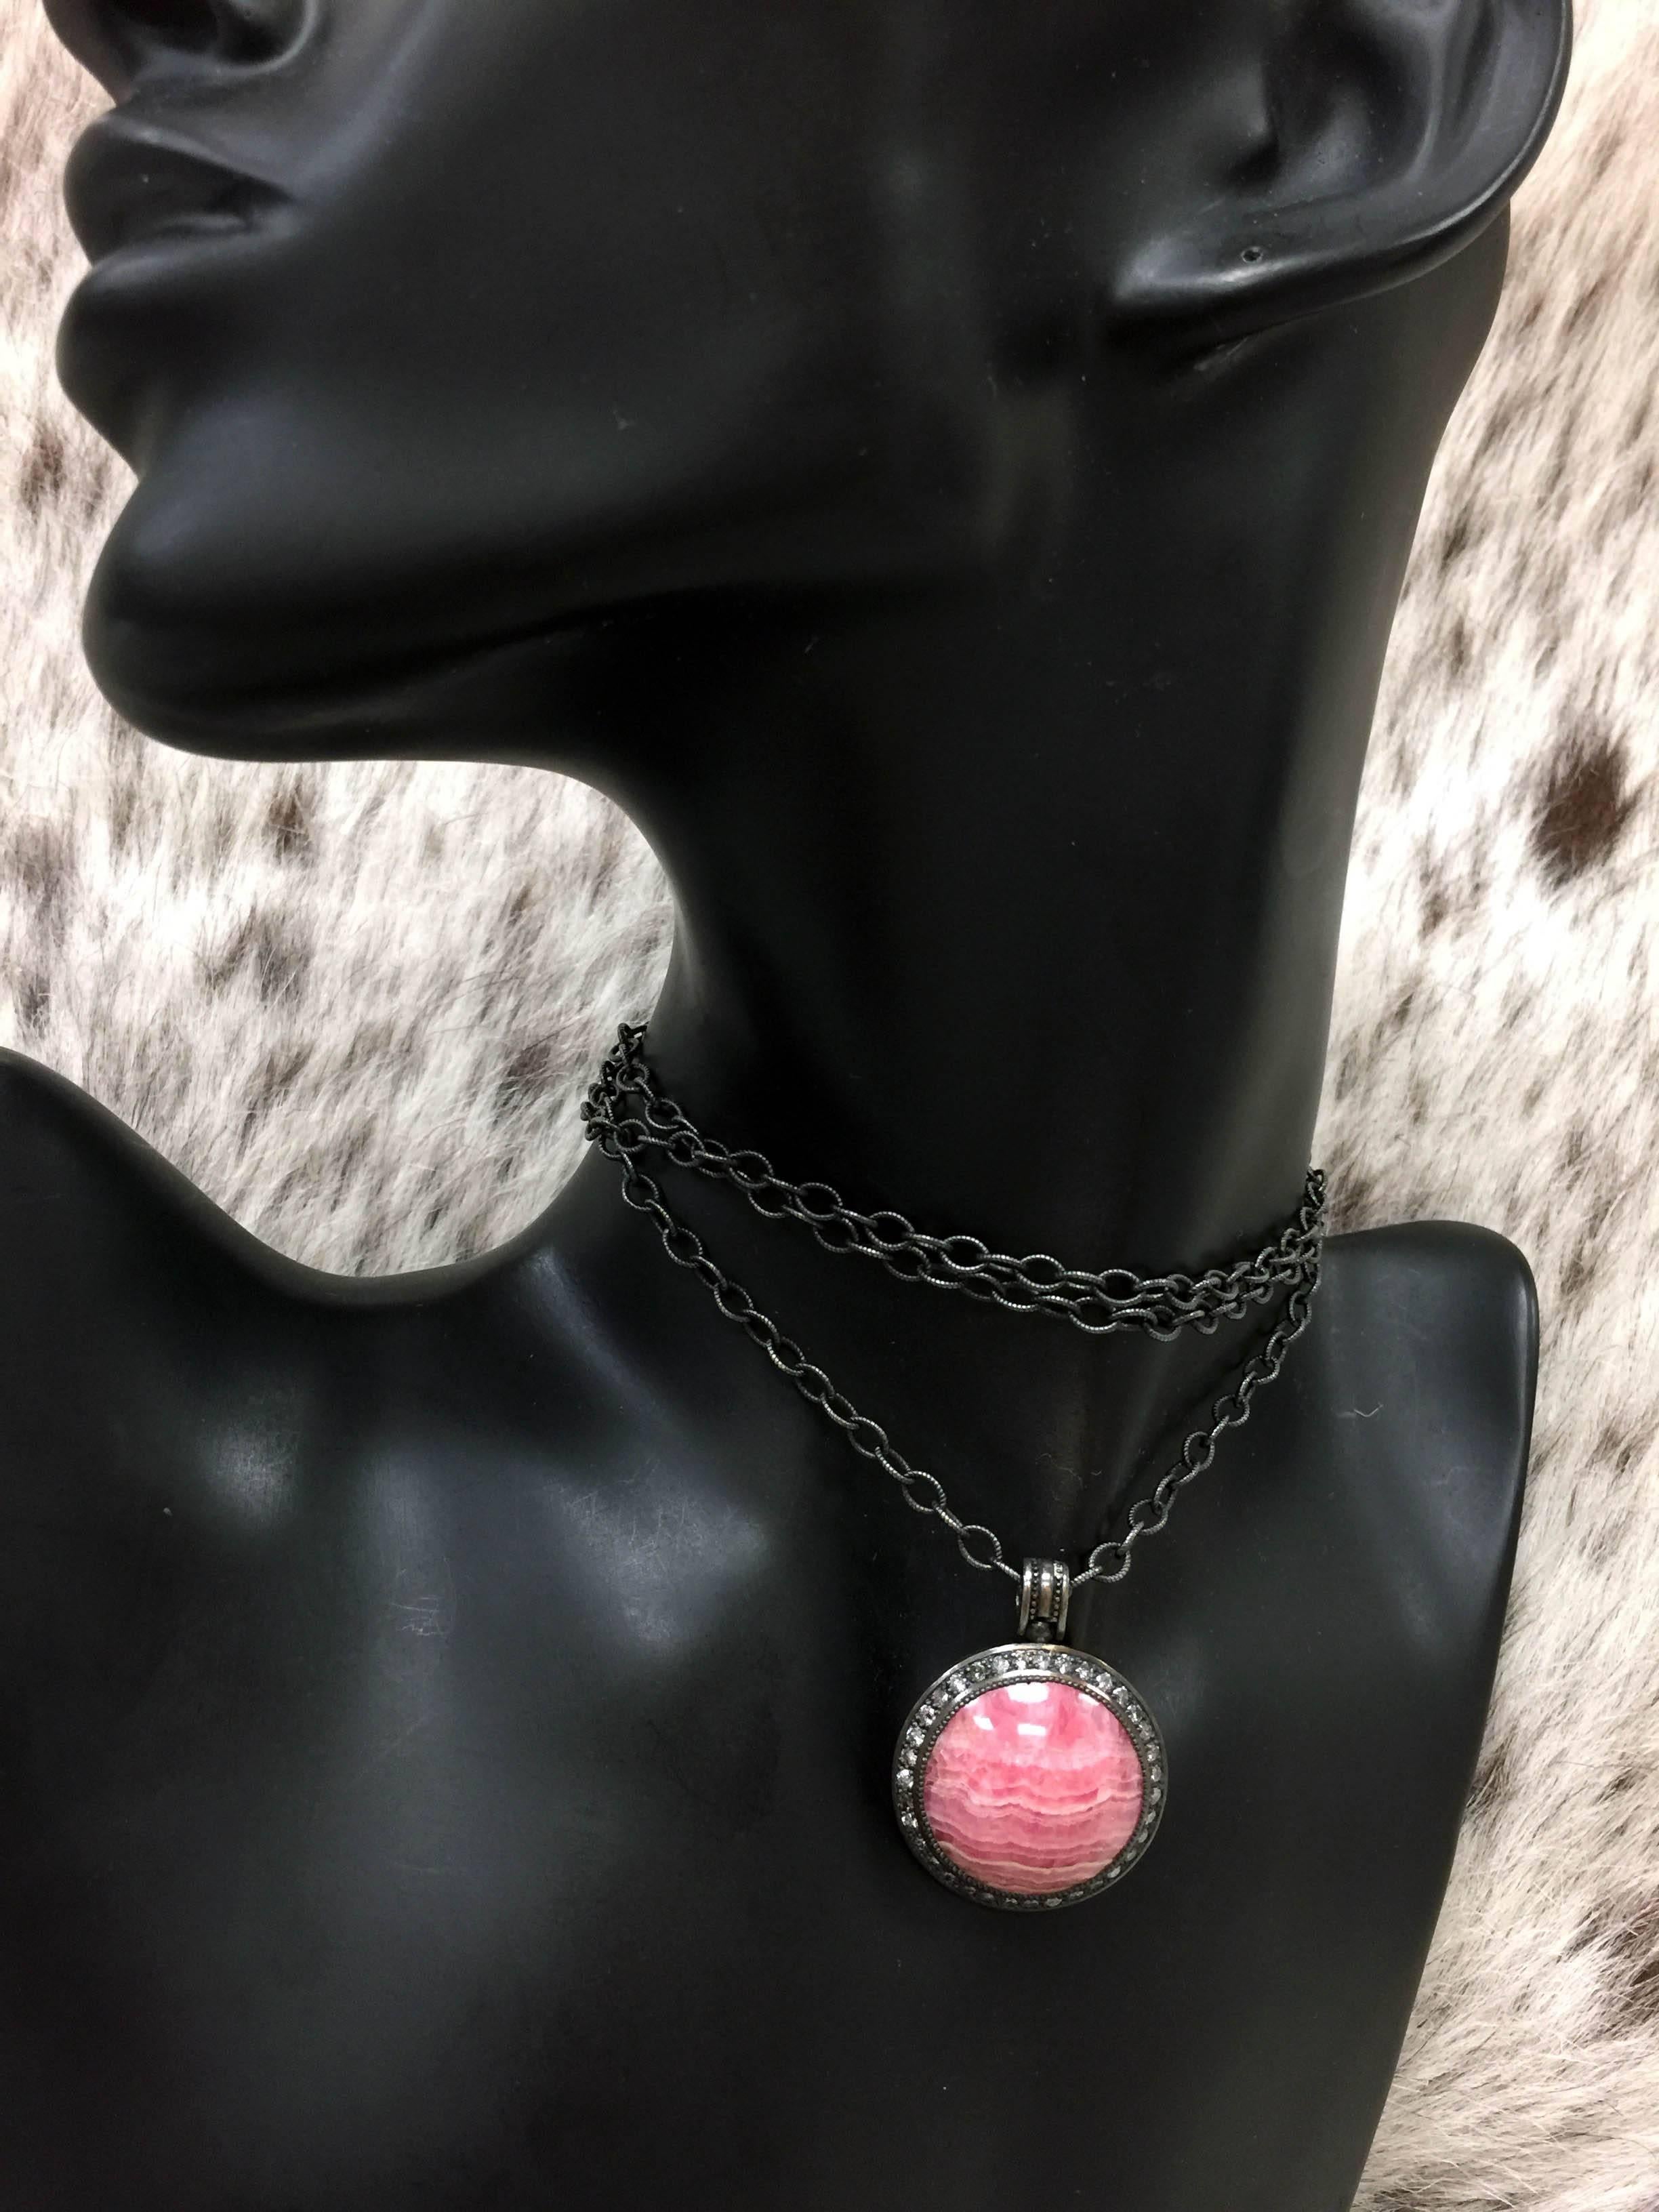 Alex Solider Rhodochrosite & Diamond Oxidized Silver Pendant Choker Necklace on 30 inch black silver chain that allows versatile wear. One of a kind. Handmade in NYC. Inspired by the grandeur of antiquity, the Symbolica collection is enriched